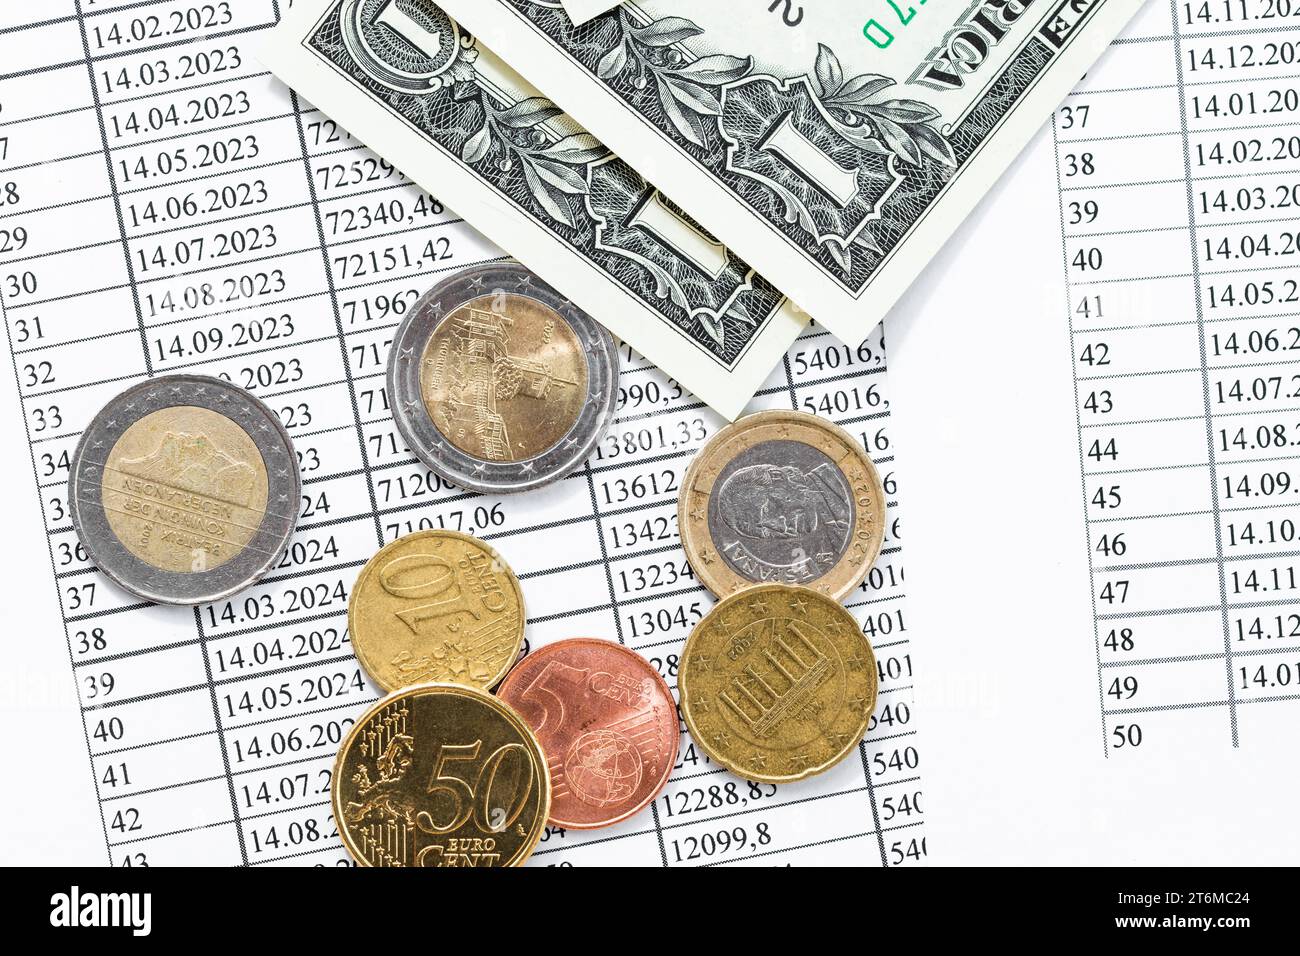 View from the top of banknotes, coins and payroll, money in a financial analyzing concept. Stock Photo